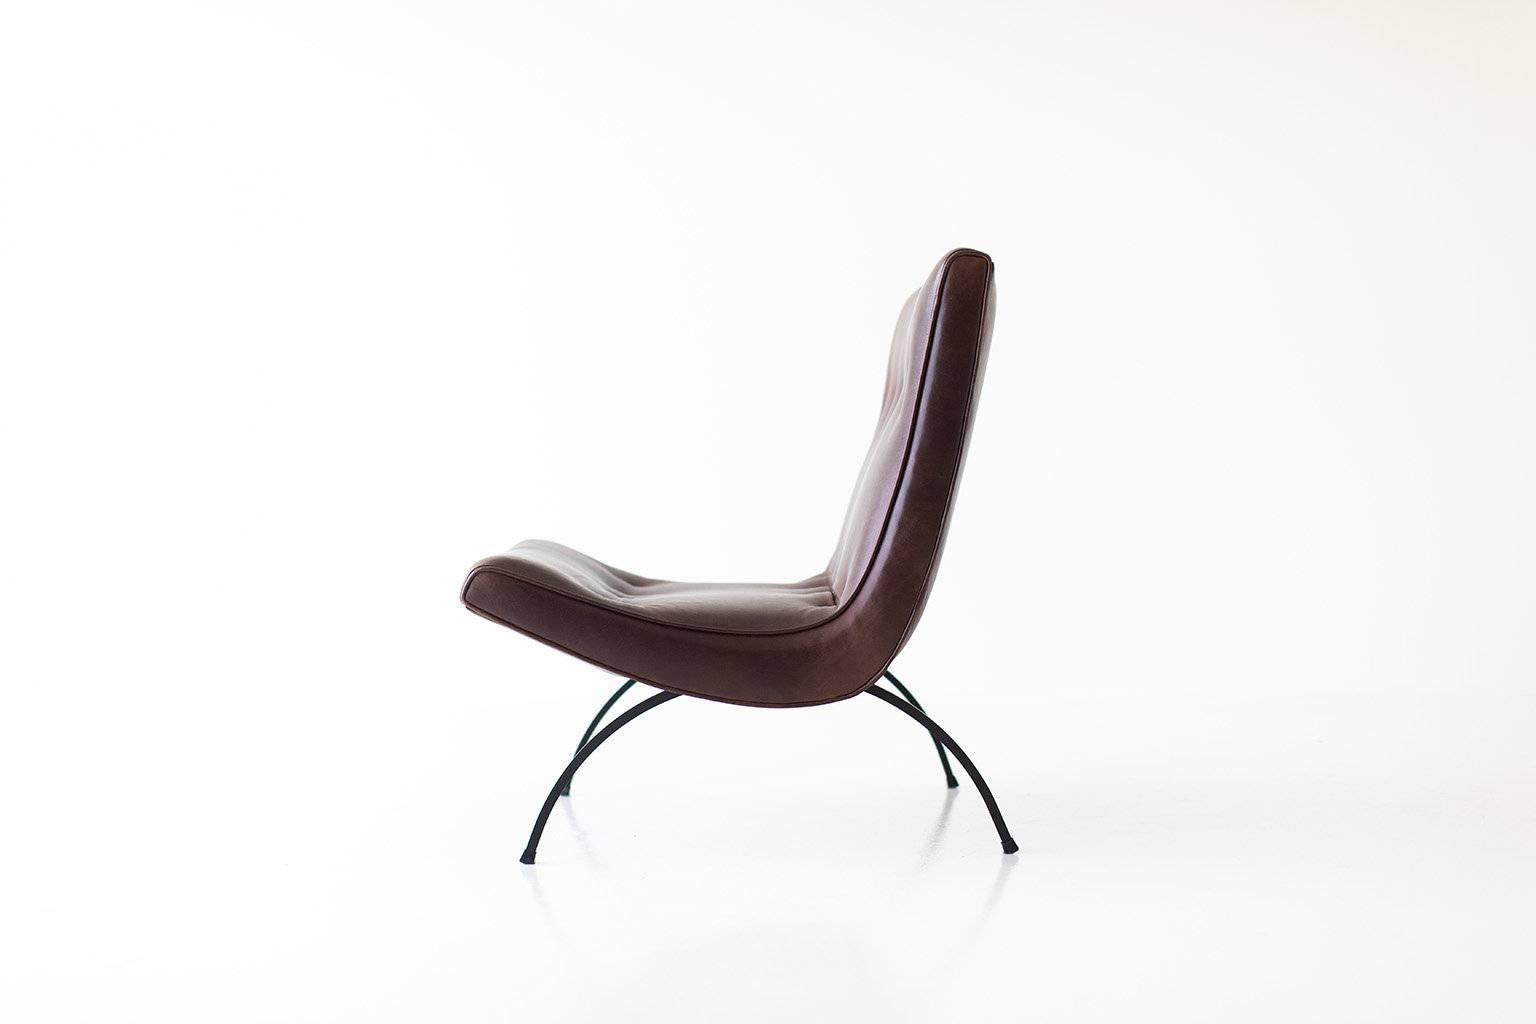 Mid-20th Century Milo Baughman Leather Scoop Lounge Chair for Thayer Coggin